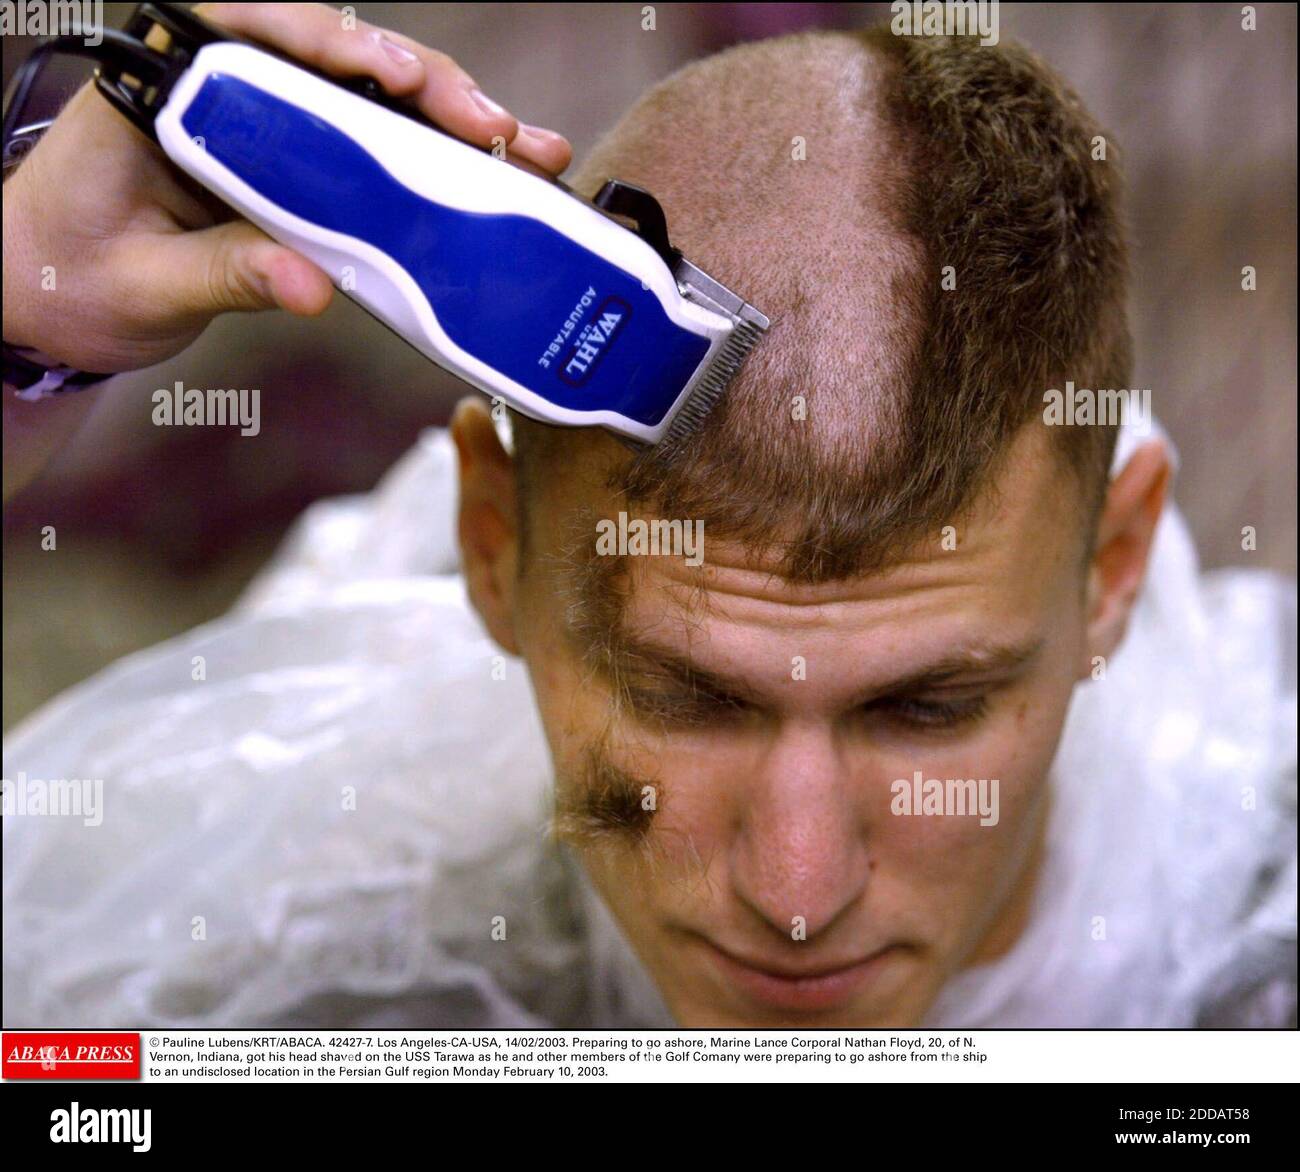 NO FILM, NO VIDEO, NO TV, NO DOCUMENTARY - © Pauline Lubens/KRT/ABACA. 42427-7. Los Angeles-CA-USA, 14/02/2003. Preparing to go ashore, Marine Lance Corporal Nathan Floyd, 20, of N. Vernon, Indiana, got his head shaved on the USS Tarawa as he and other members of the Golf Comany were preparing to Stock Photo